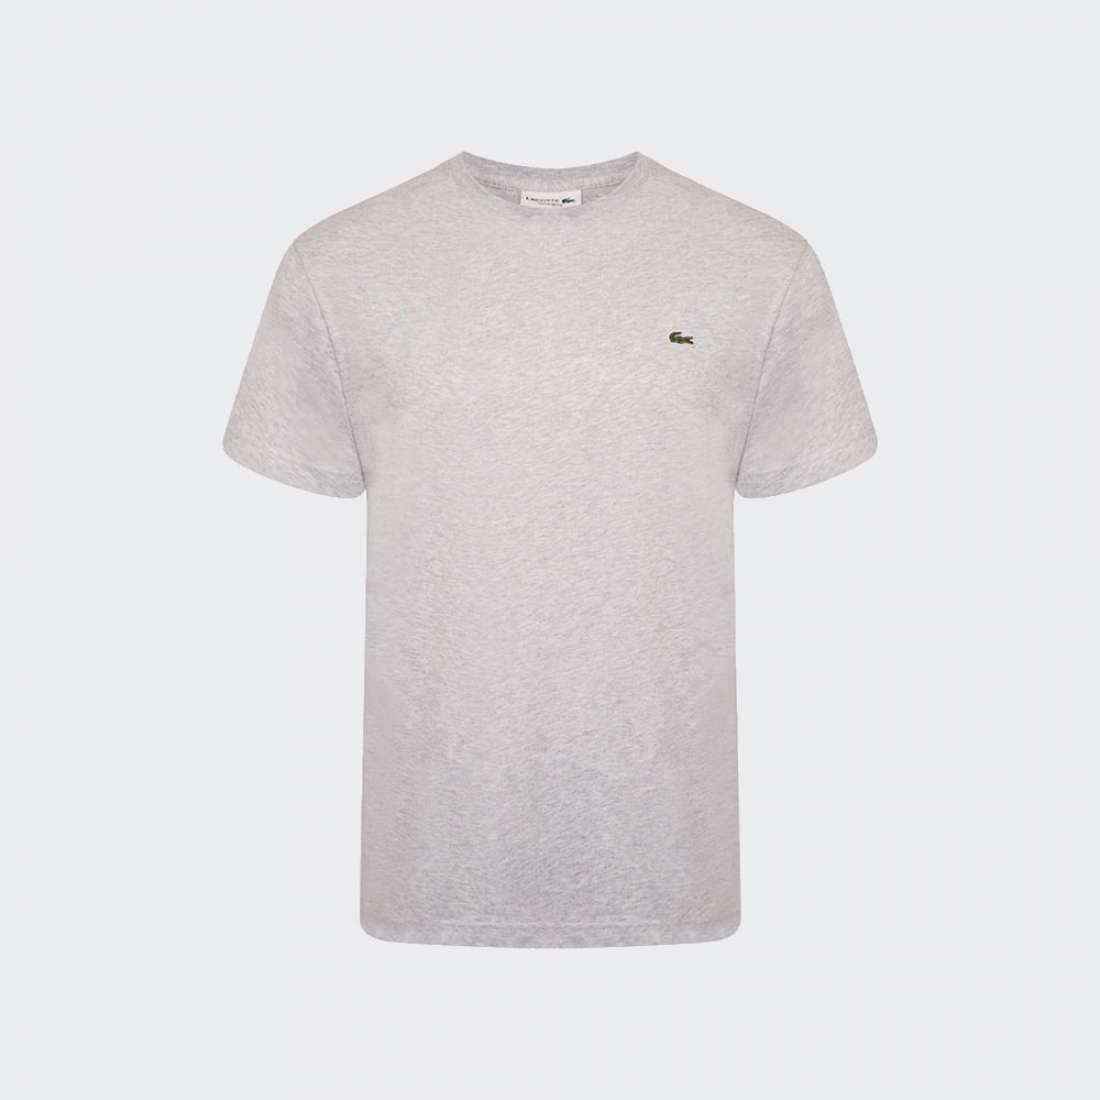 T-SHIRT LACOSTE TH23800 ARGENT CHINE